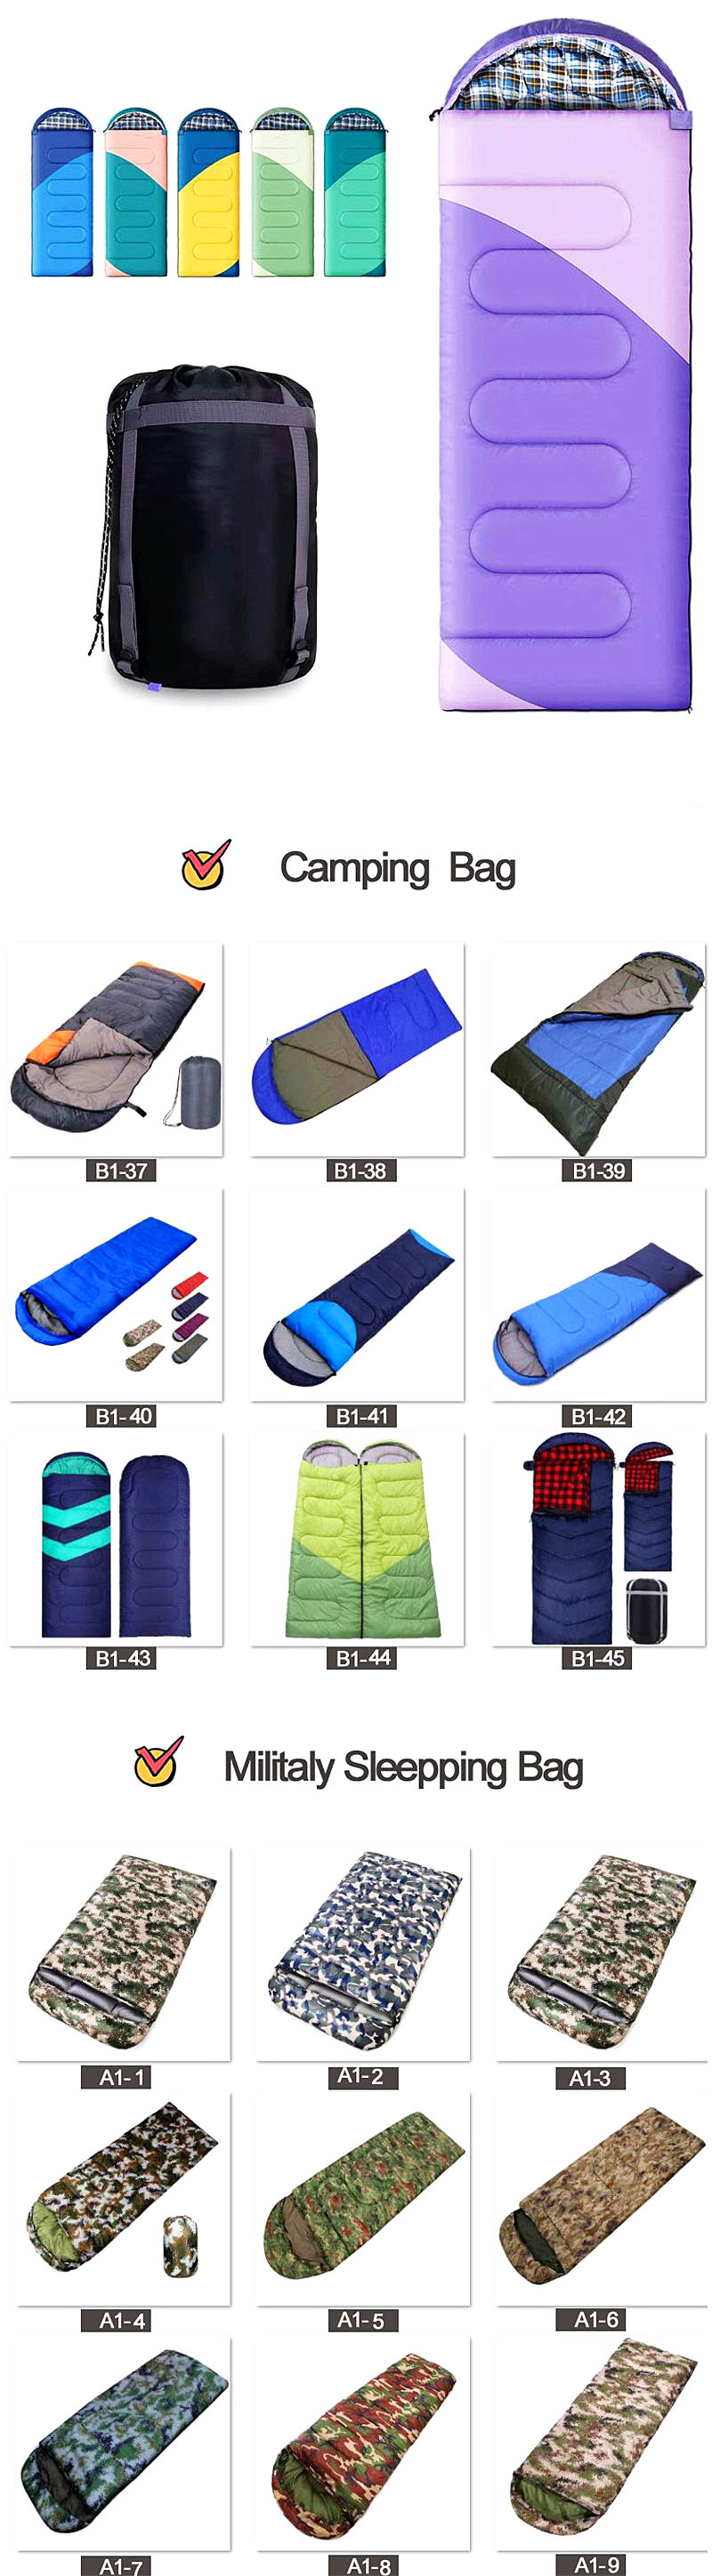 Outdoor Travel Mummy Style Down Sleeping Bag For Outdoor Camping Backpacking